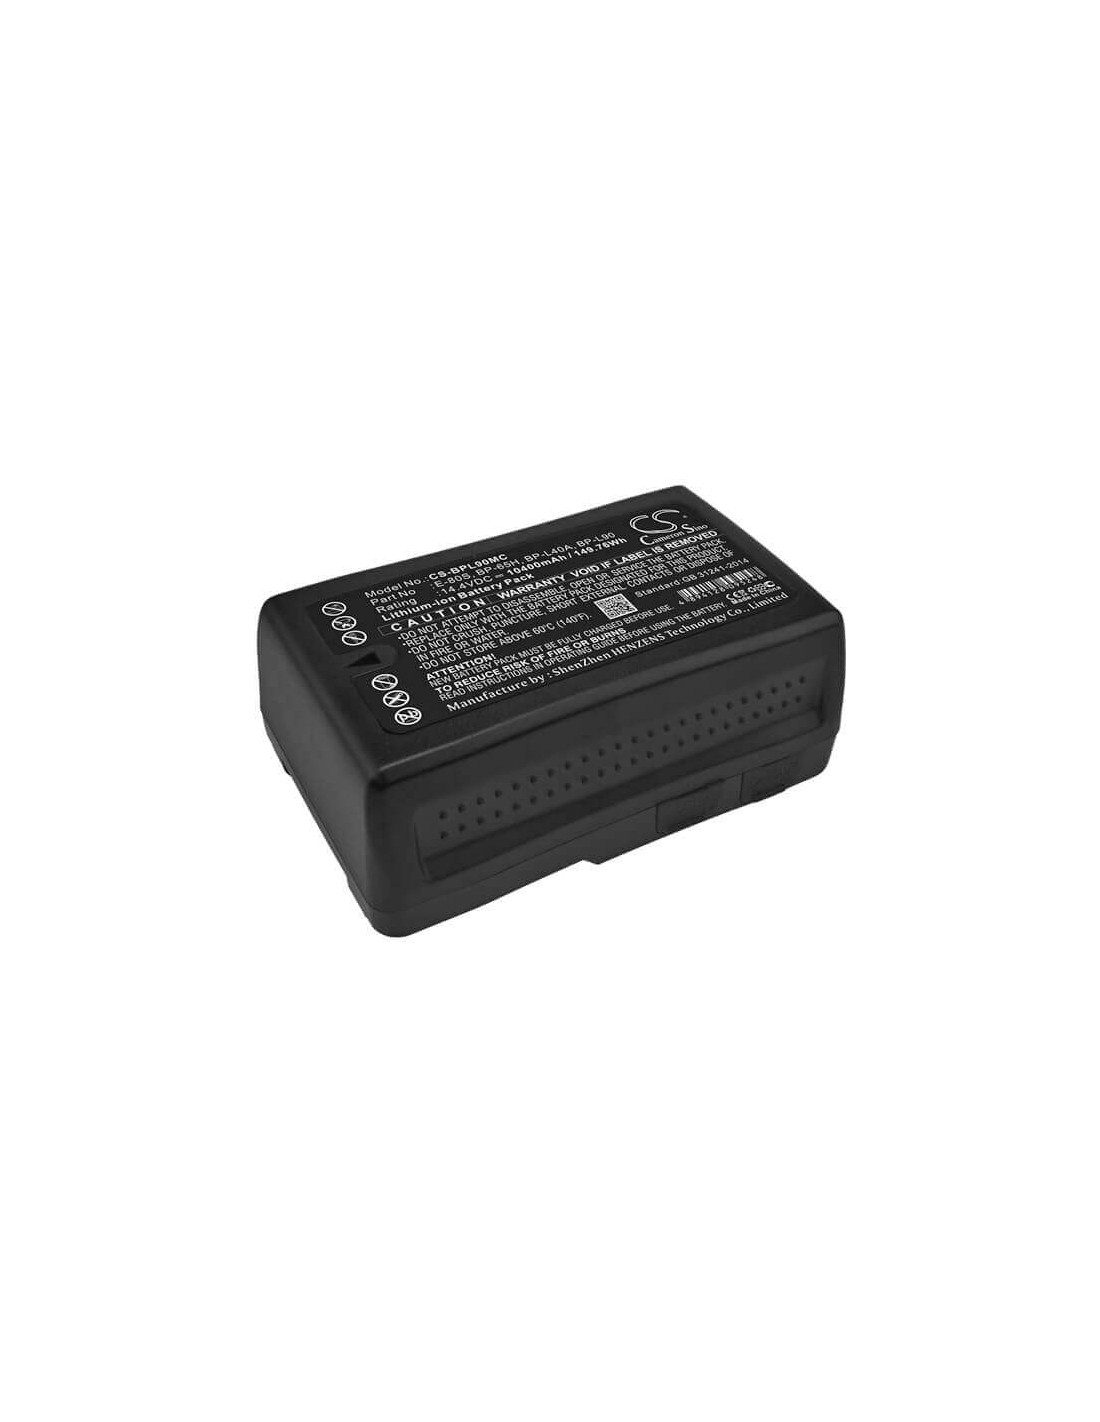 Battery for Sony Bc-l100ce, Bvm-d9, Bvm-d9h1a (broadcast 14.4V, 10400mAh - 149.76Wh